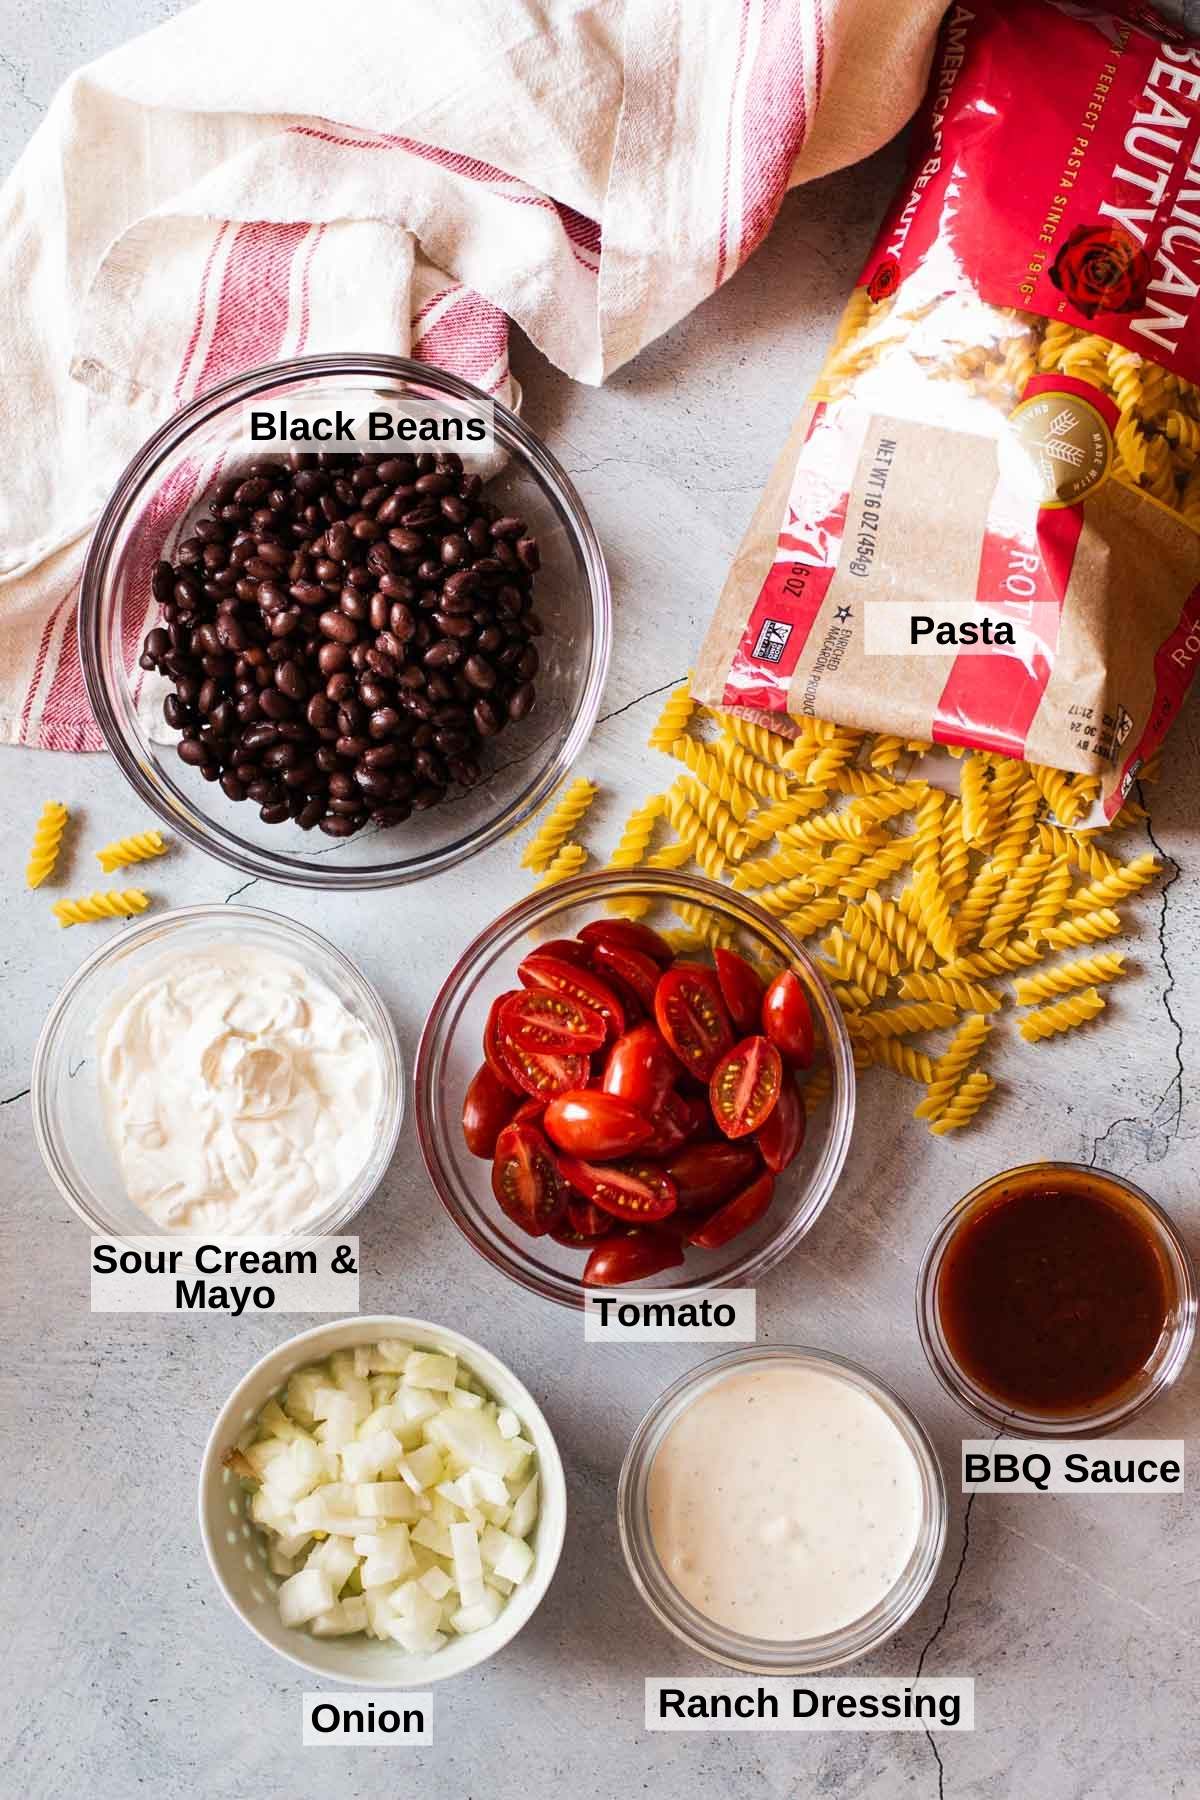 Ingredients to make bbq pasta salad with black beans.